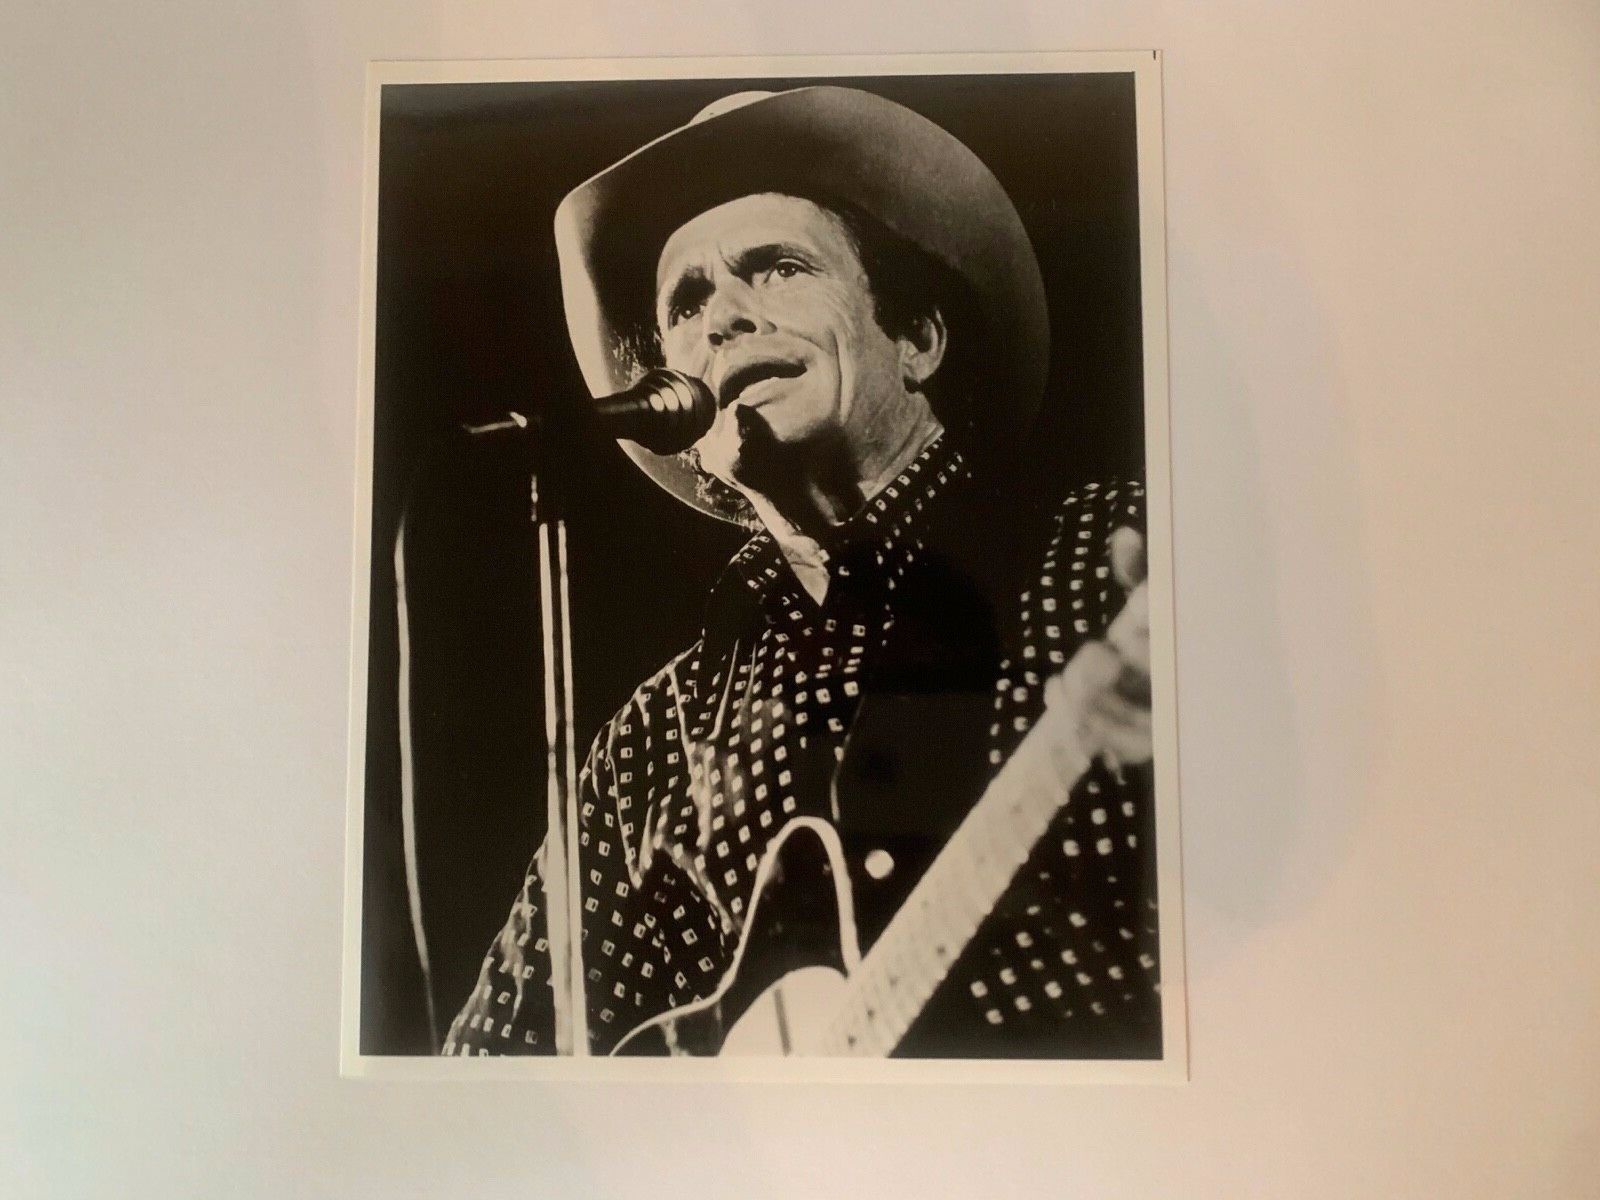 Merle Haggard Musician Songwriter Vintage Publicity Celebrity 8x10 B&W Photo